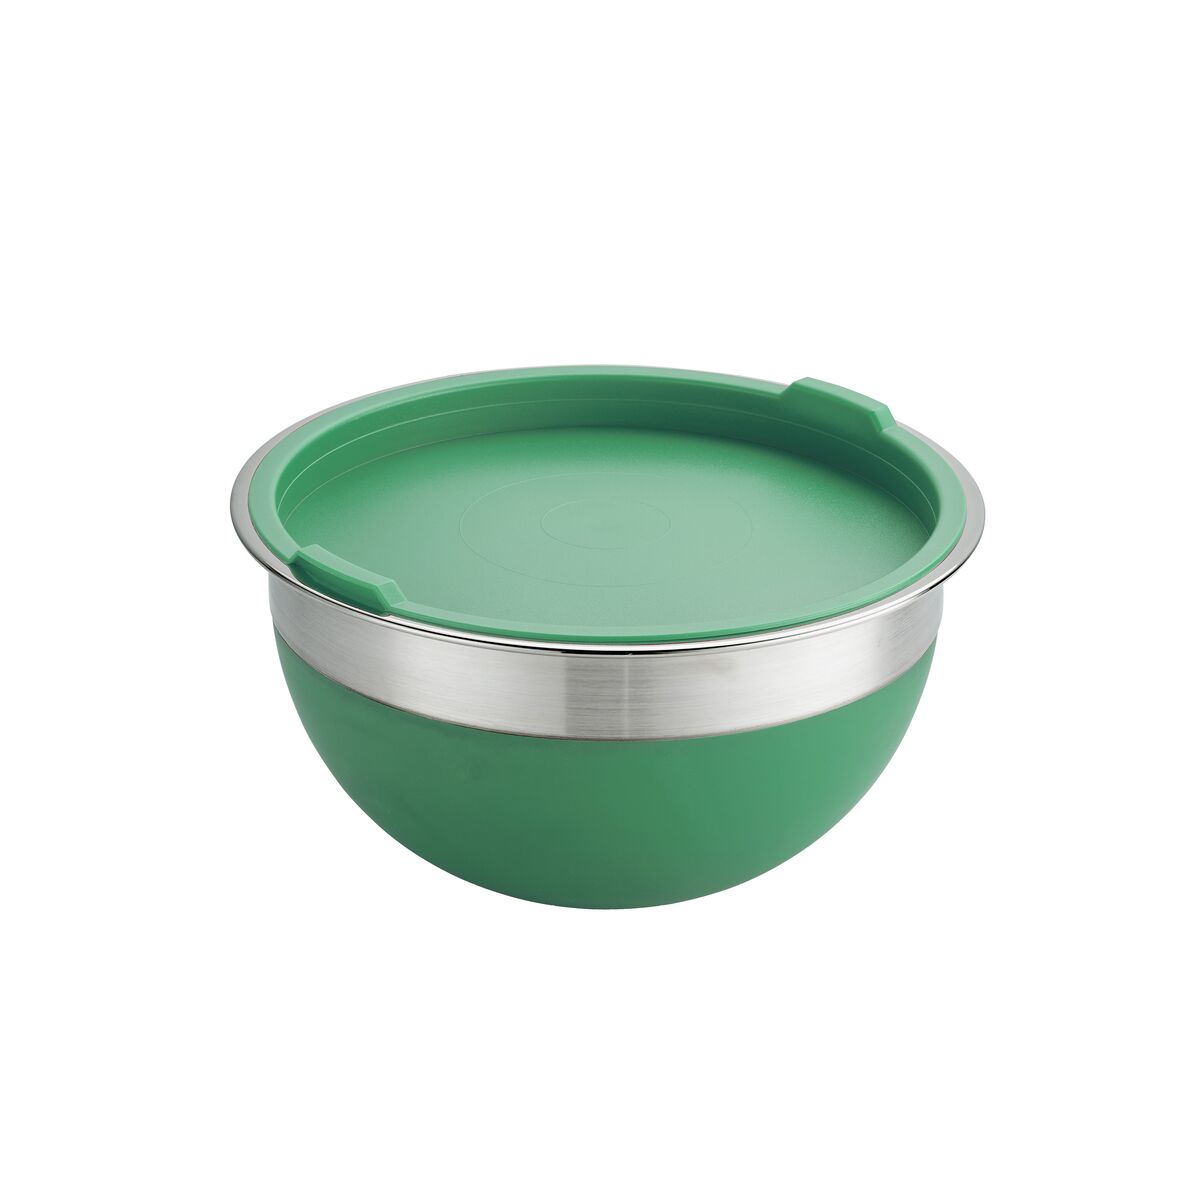 Tramontina Mint Green 10-Piece Covered Mixing Bowl Set